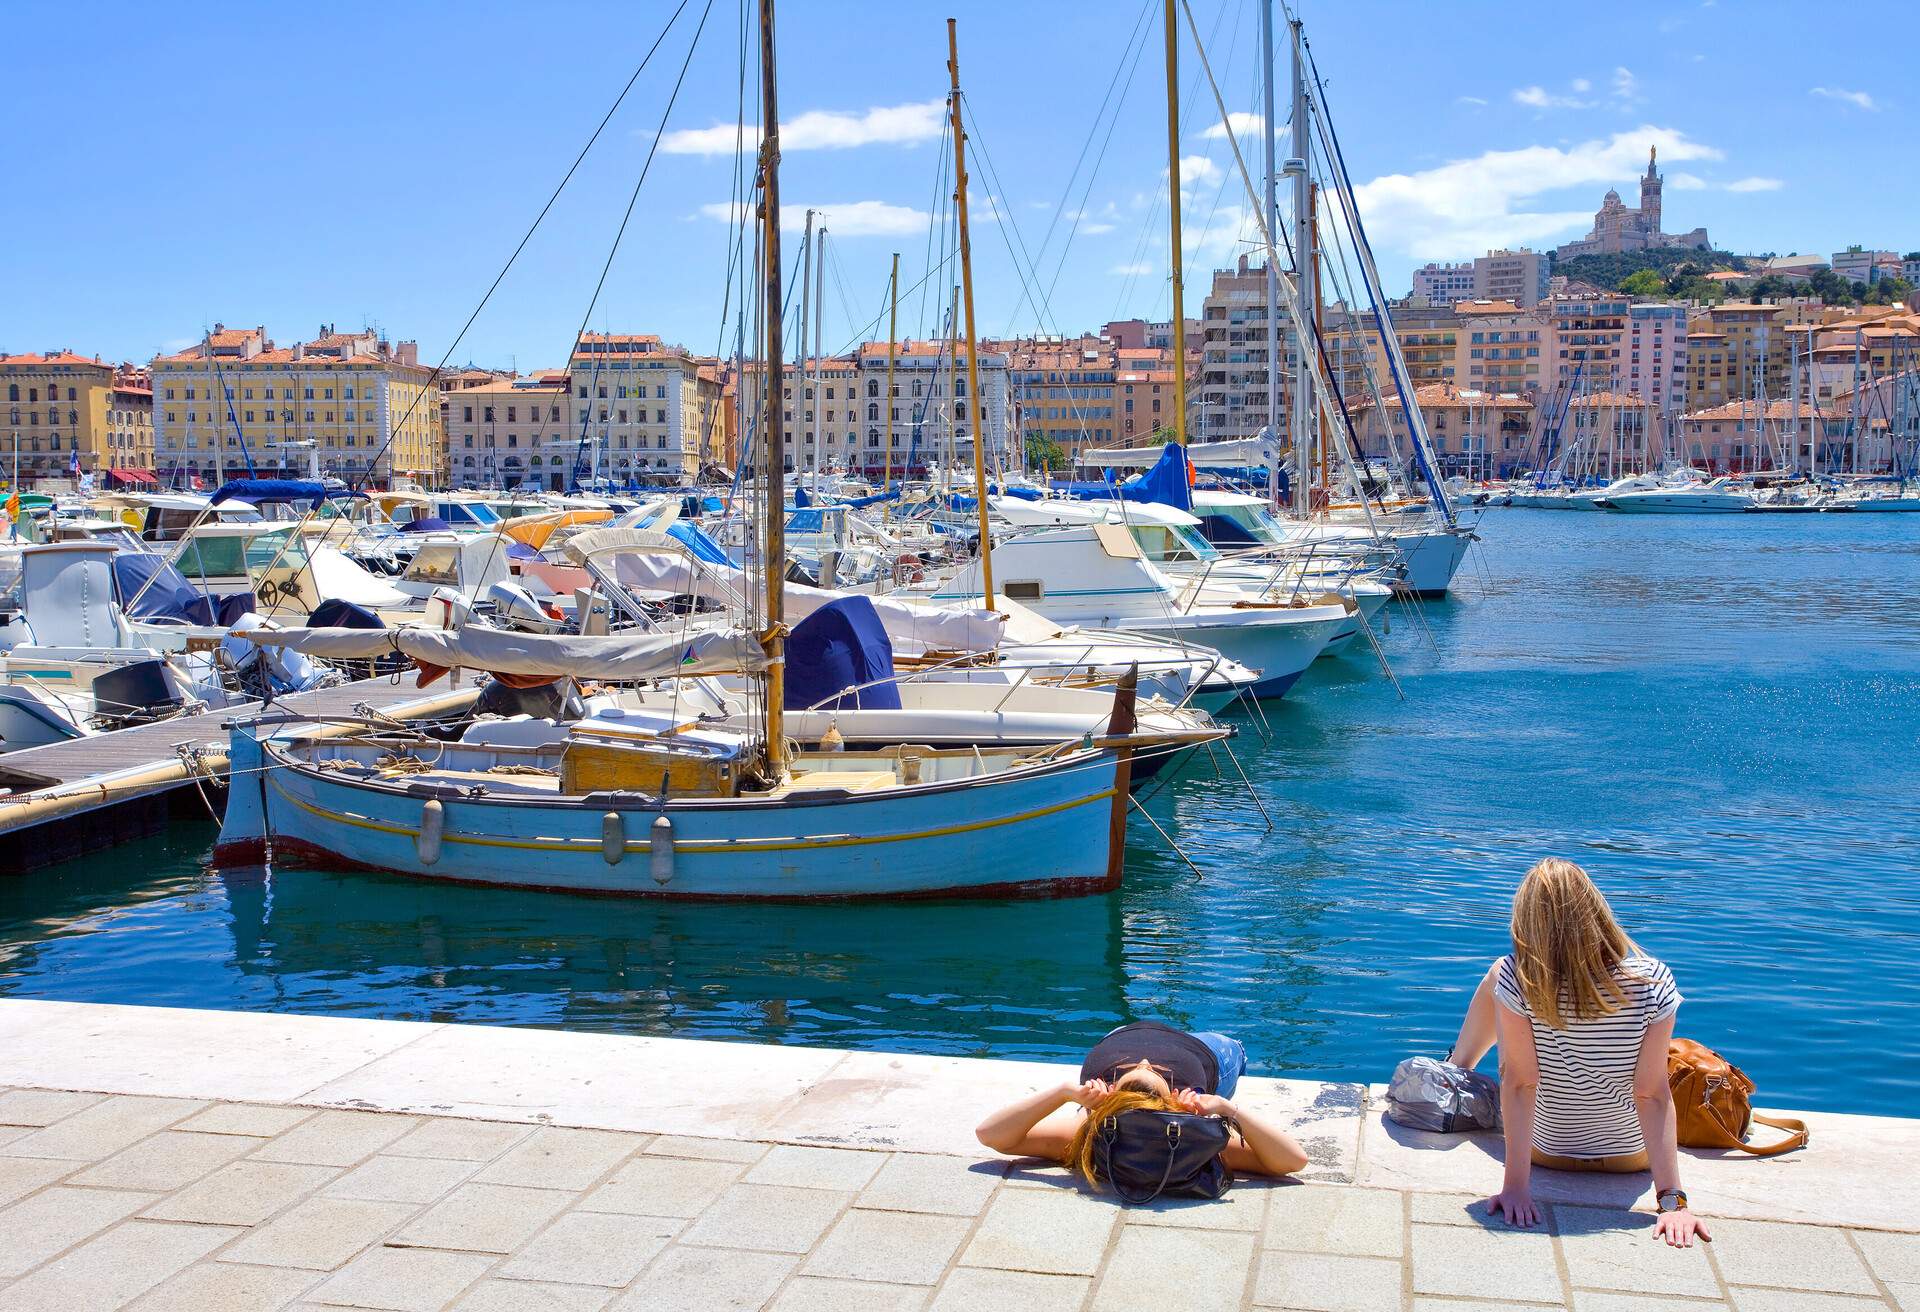 DEST_FRANCE_MARSEILLE_Women relaxing at the old port of Marseille_shutterstock-premier_1038850441